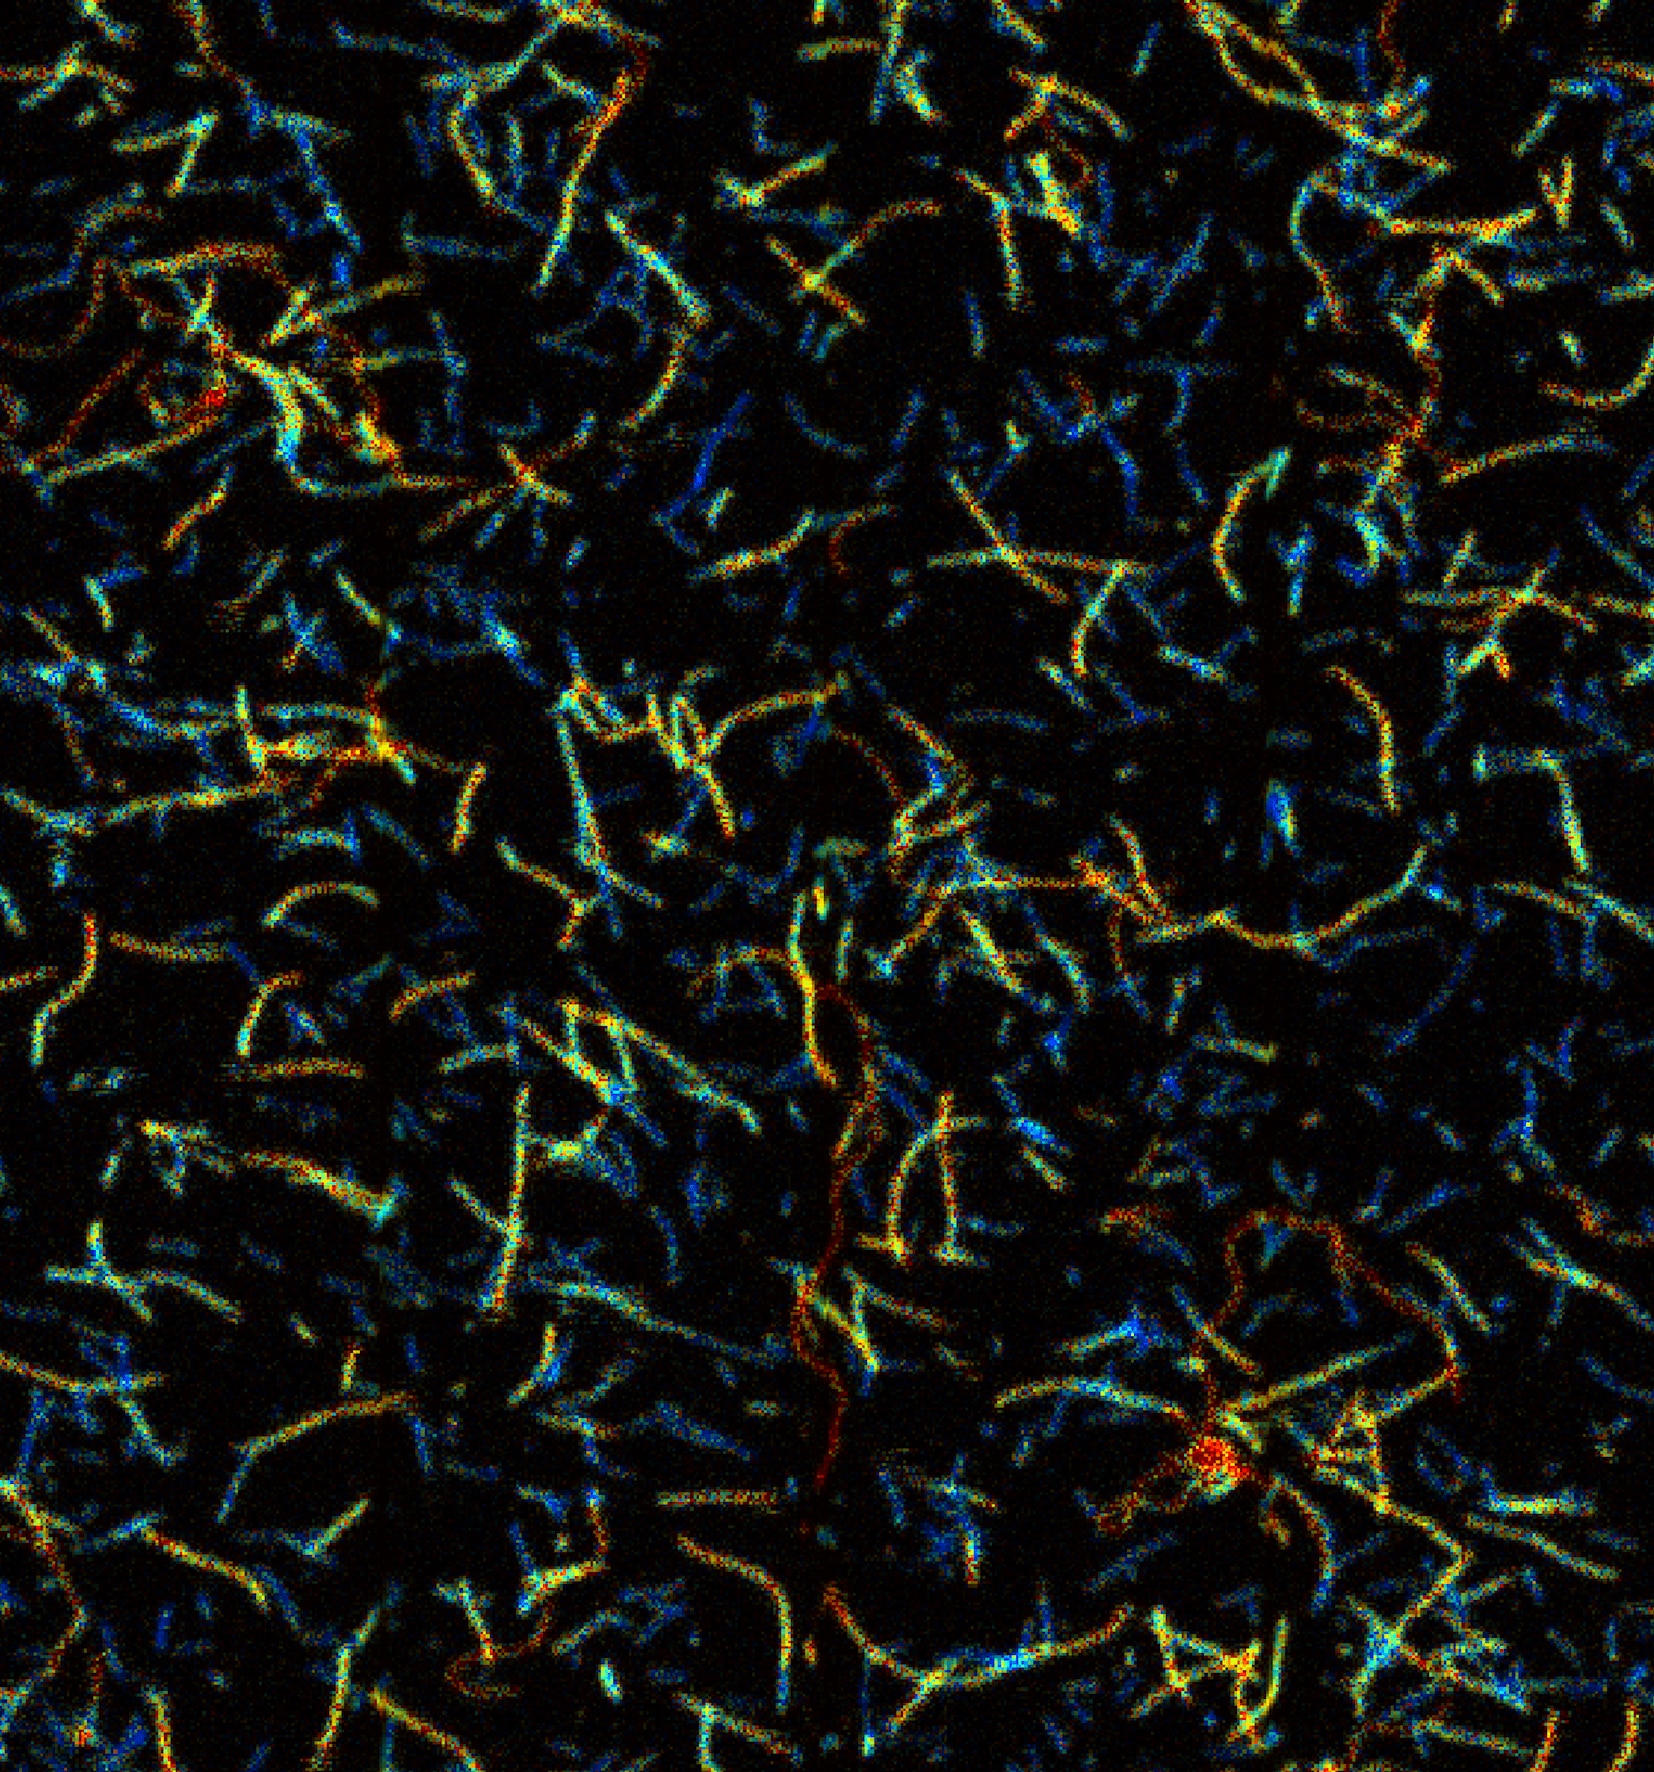 Heterogeneous amyloid beta fibril formation probed by fluorescence lifetime imaging.